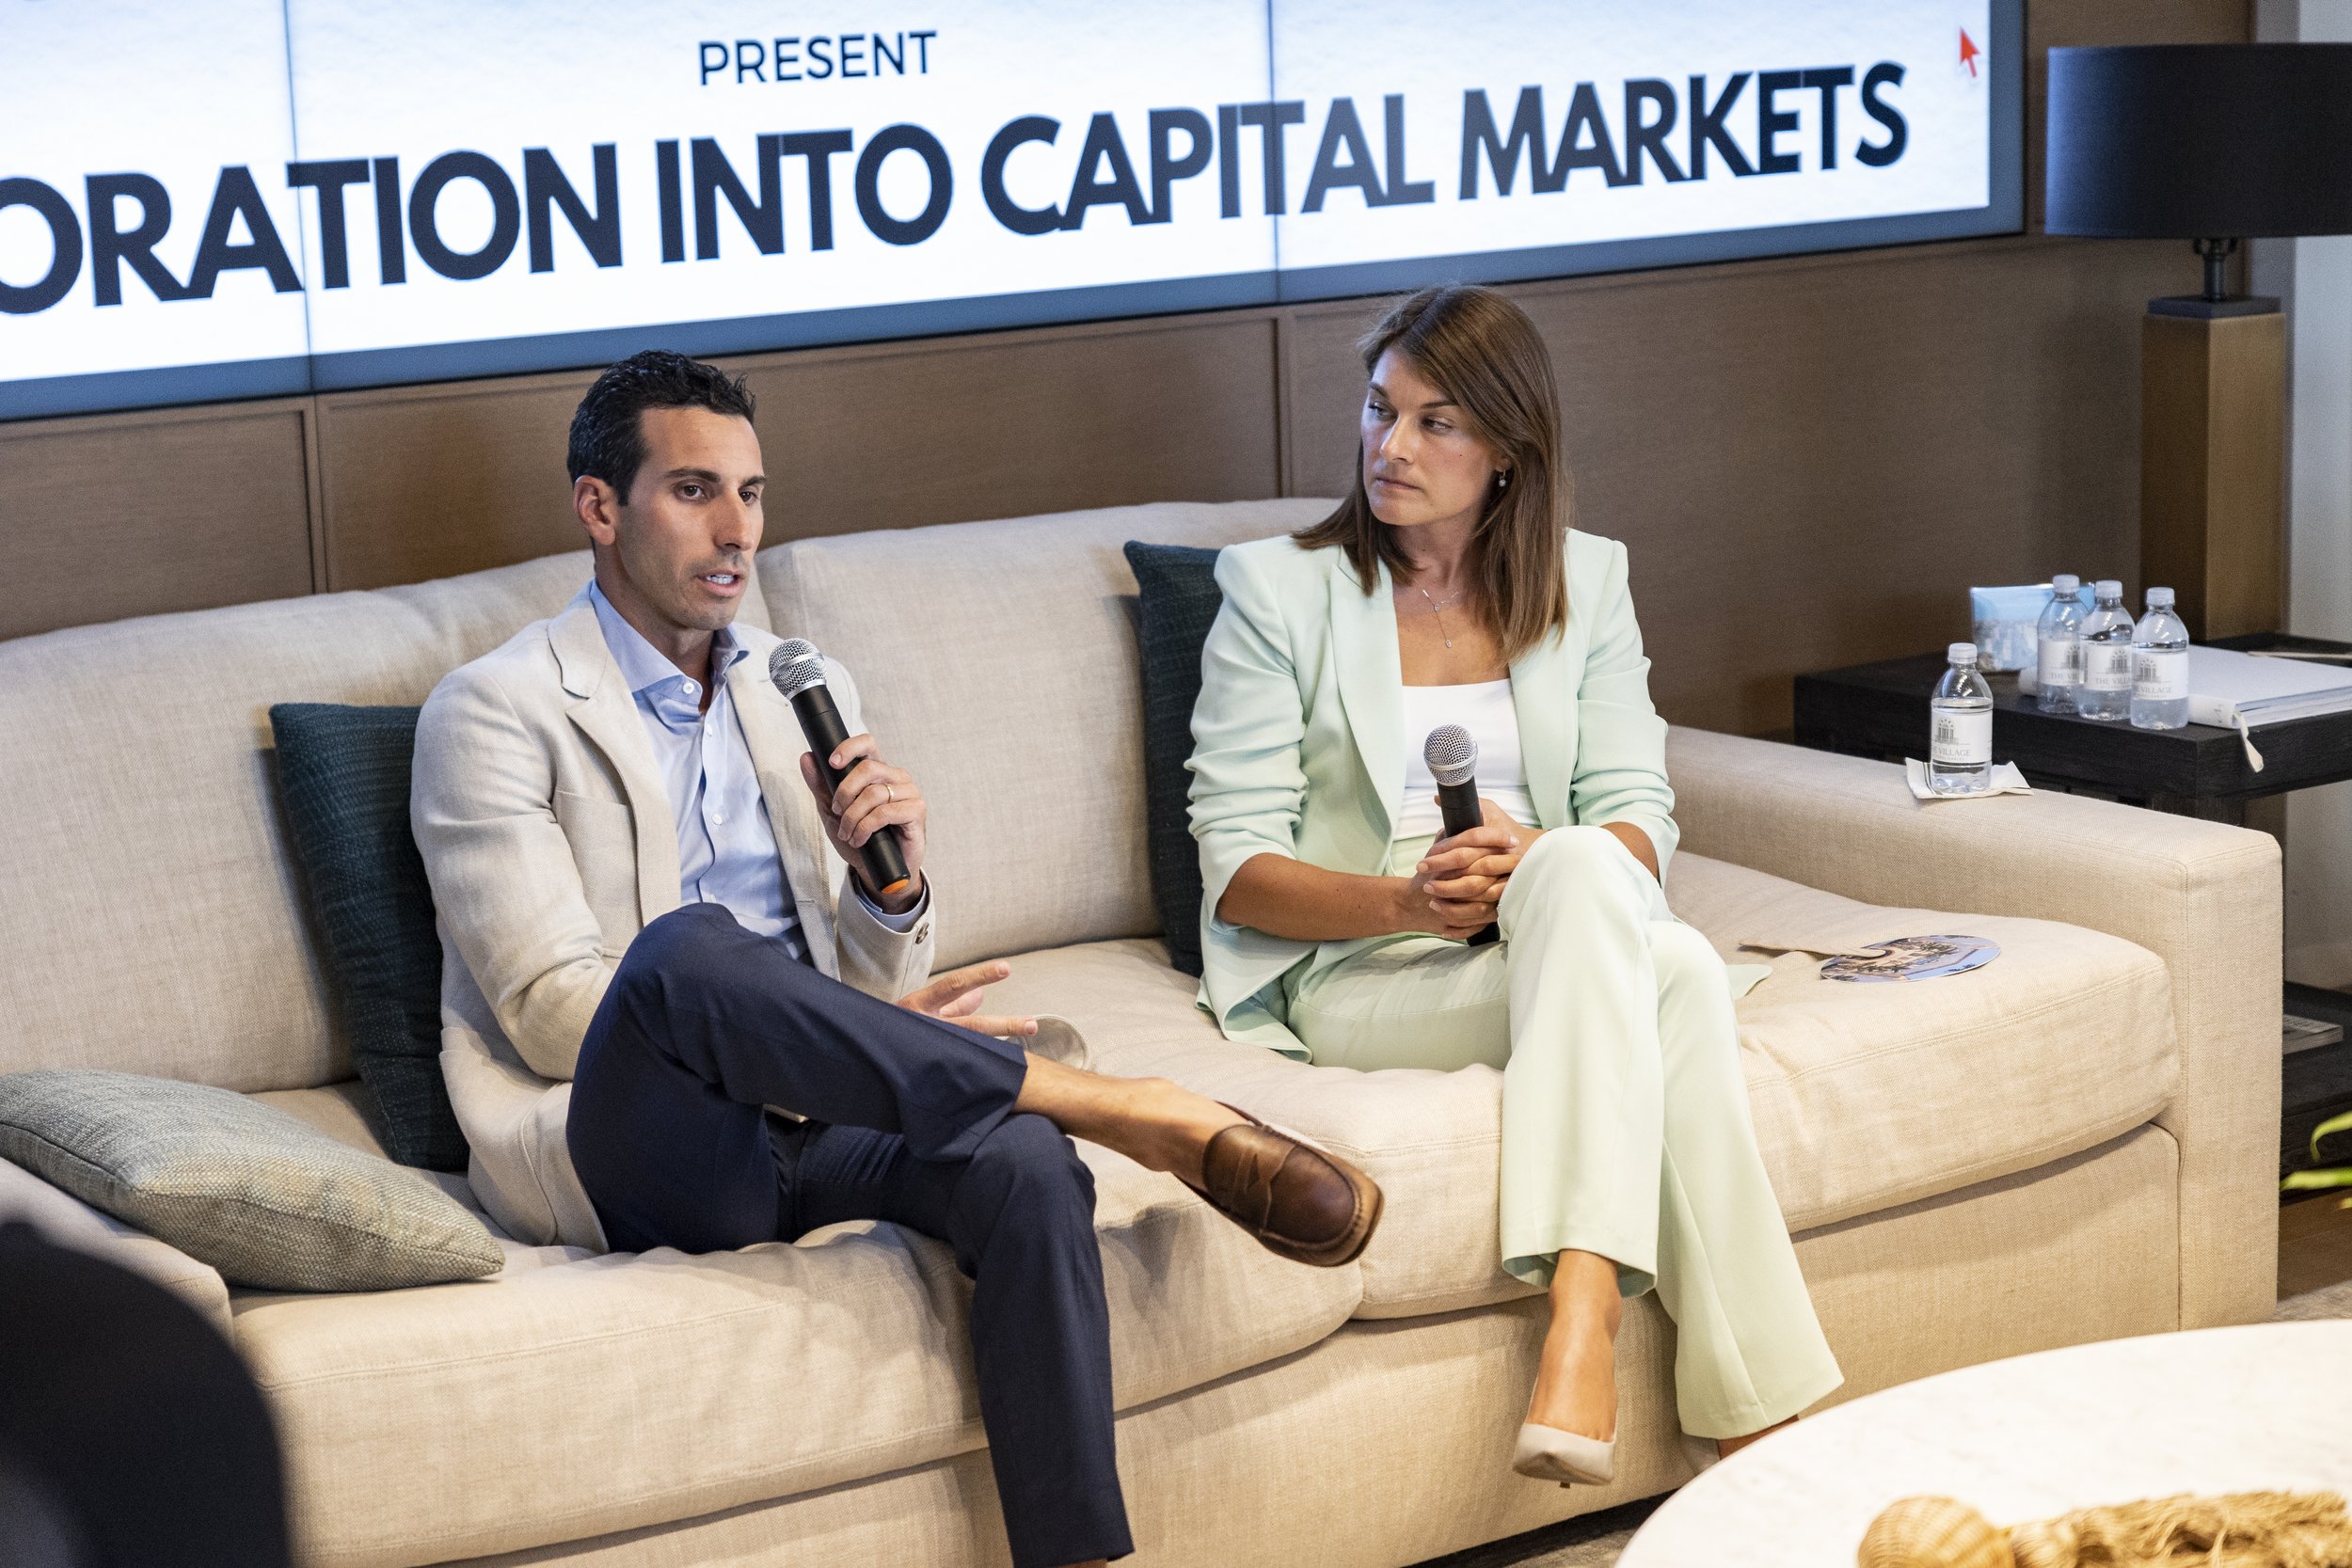 Inside 'An Exploration Into Capital Markets Coral Gables' Presented By PROFILEmiami & MG Developer184.JPG